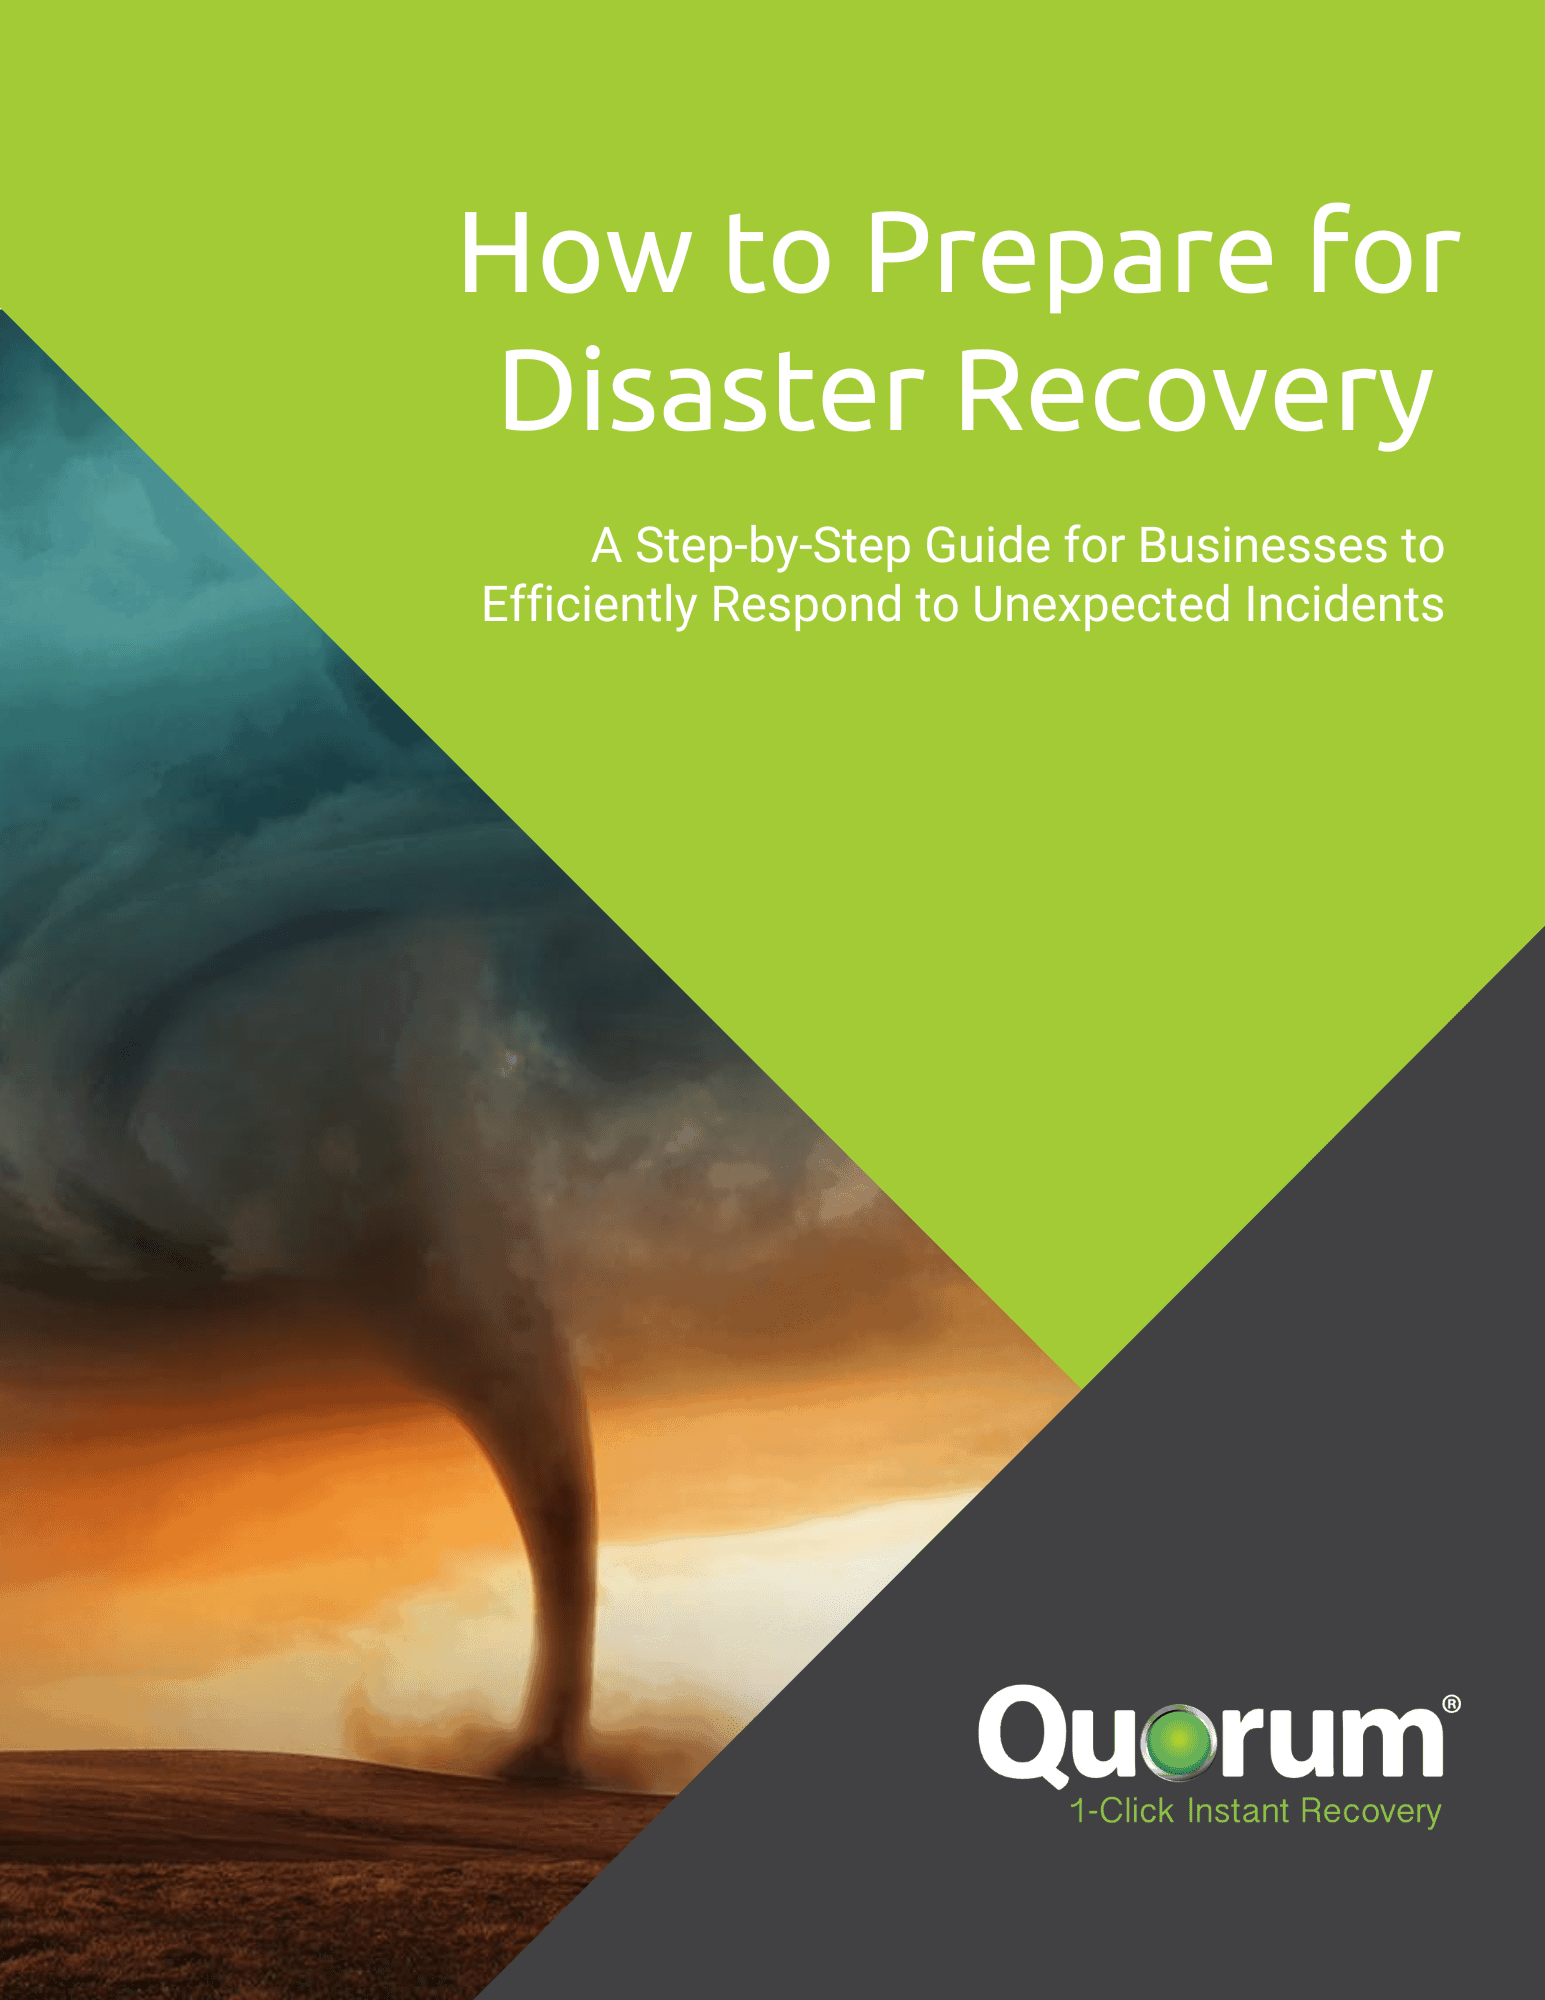 Cover of a guide titled "How to Prepare for Disaster Recovery." The subtitle reads "A Step-by-Step Guide for Businesses to Efficiently Respond to Unexpected Incidents." There is an image of a tornado, and the name "Quorum" with the tagline "1-Click Instant Recovery.